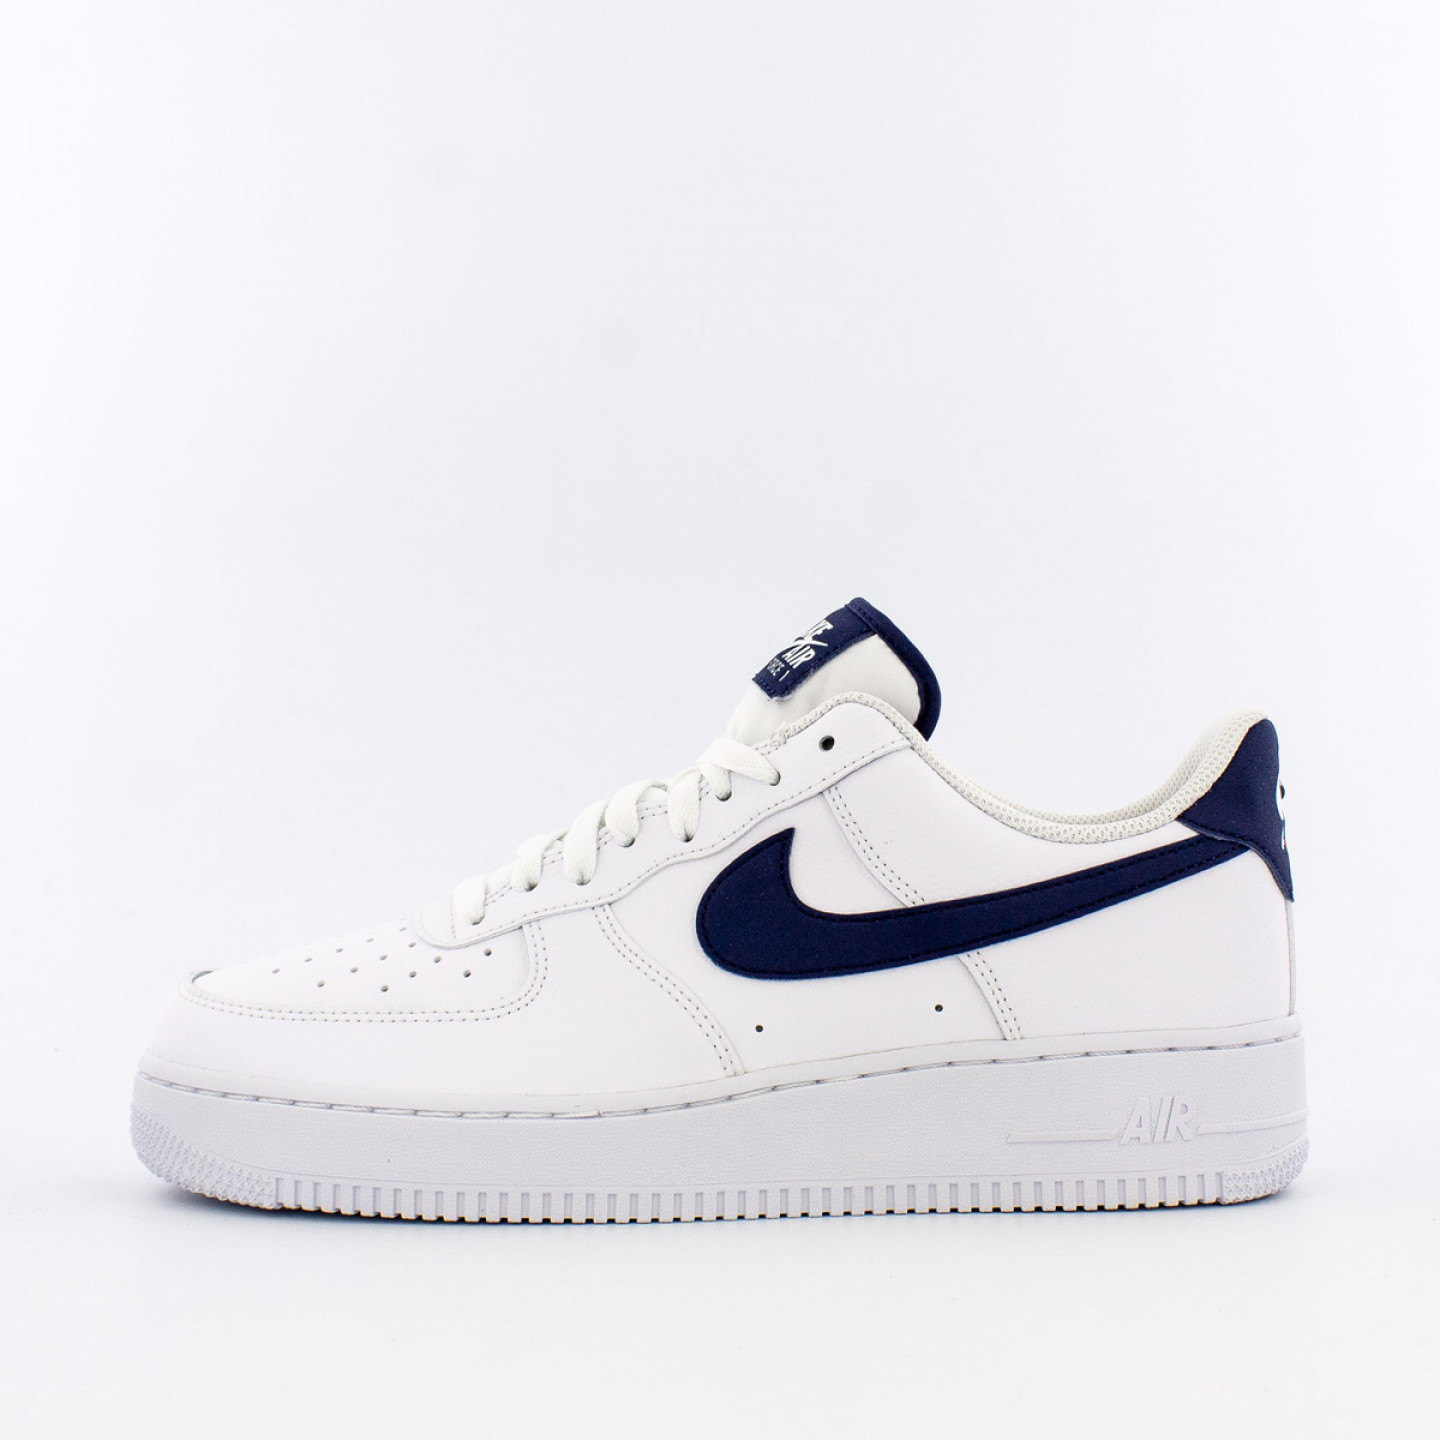 air force 1 low midnight navy